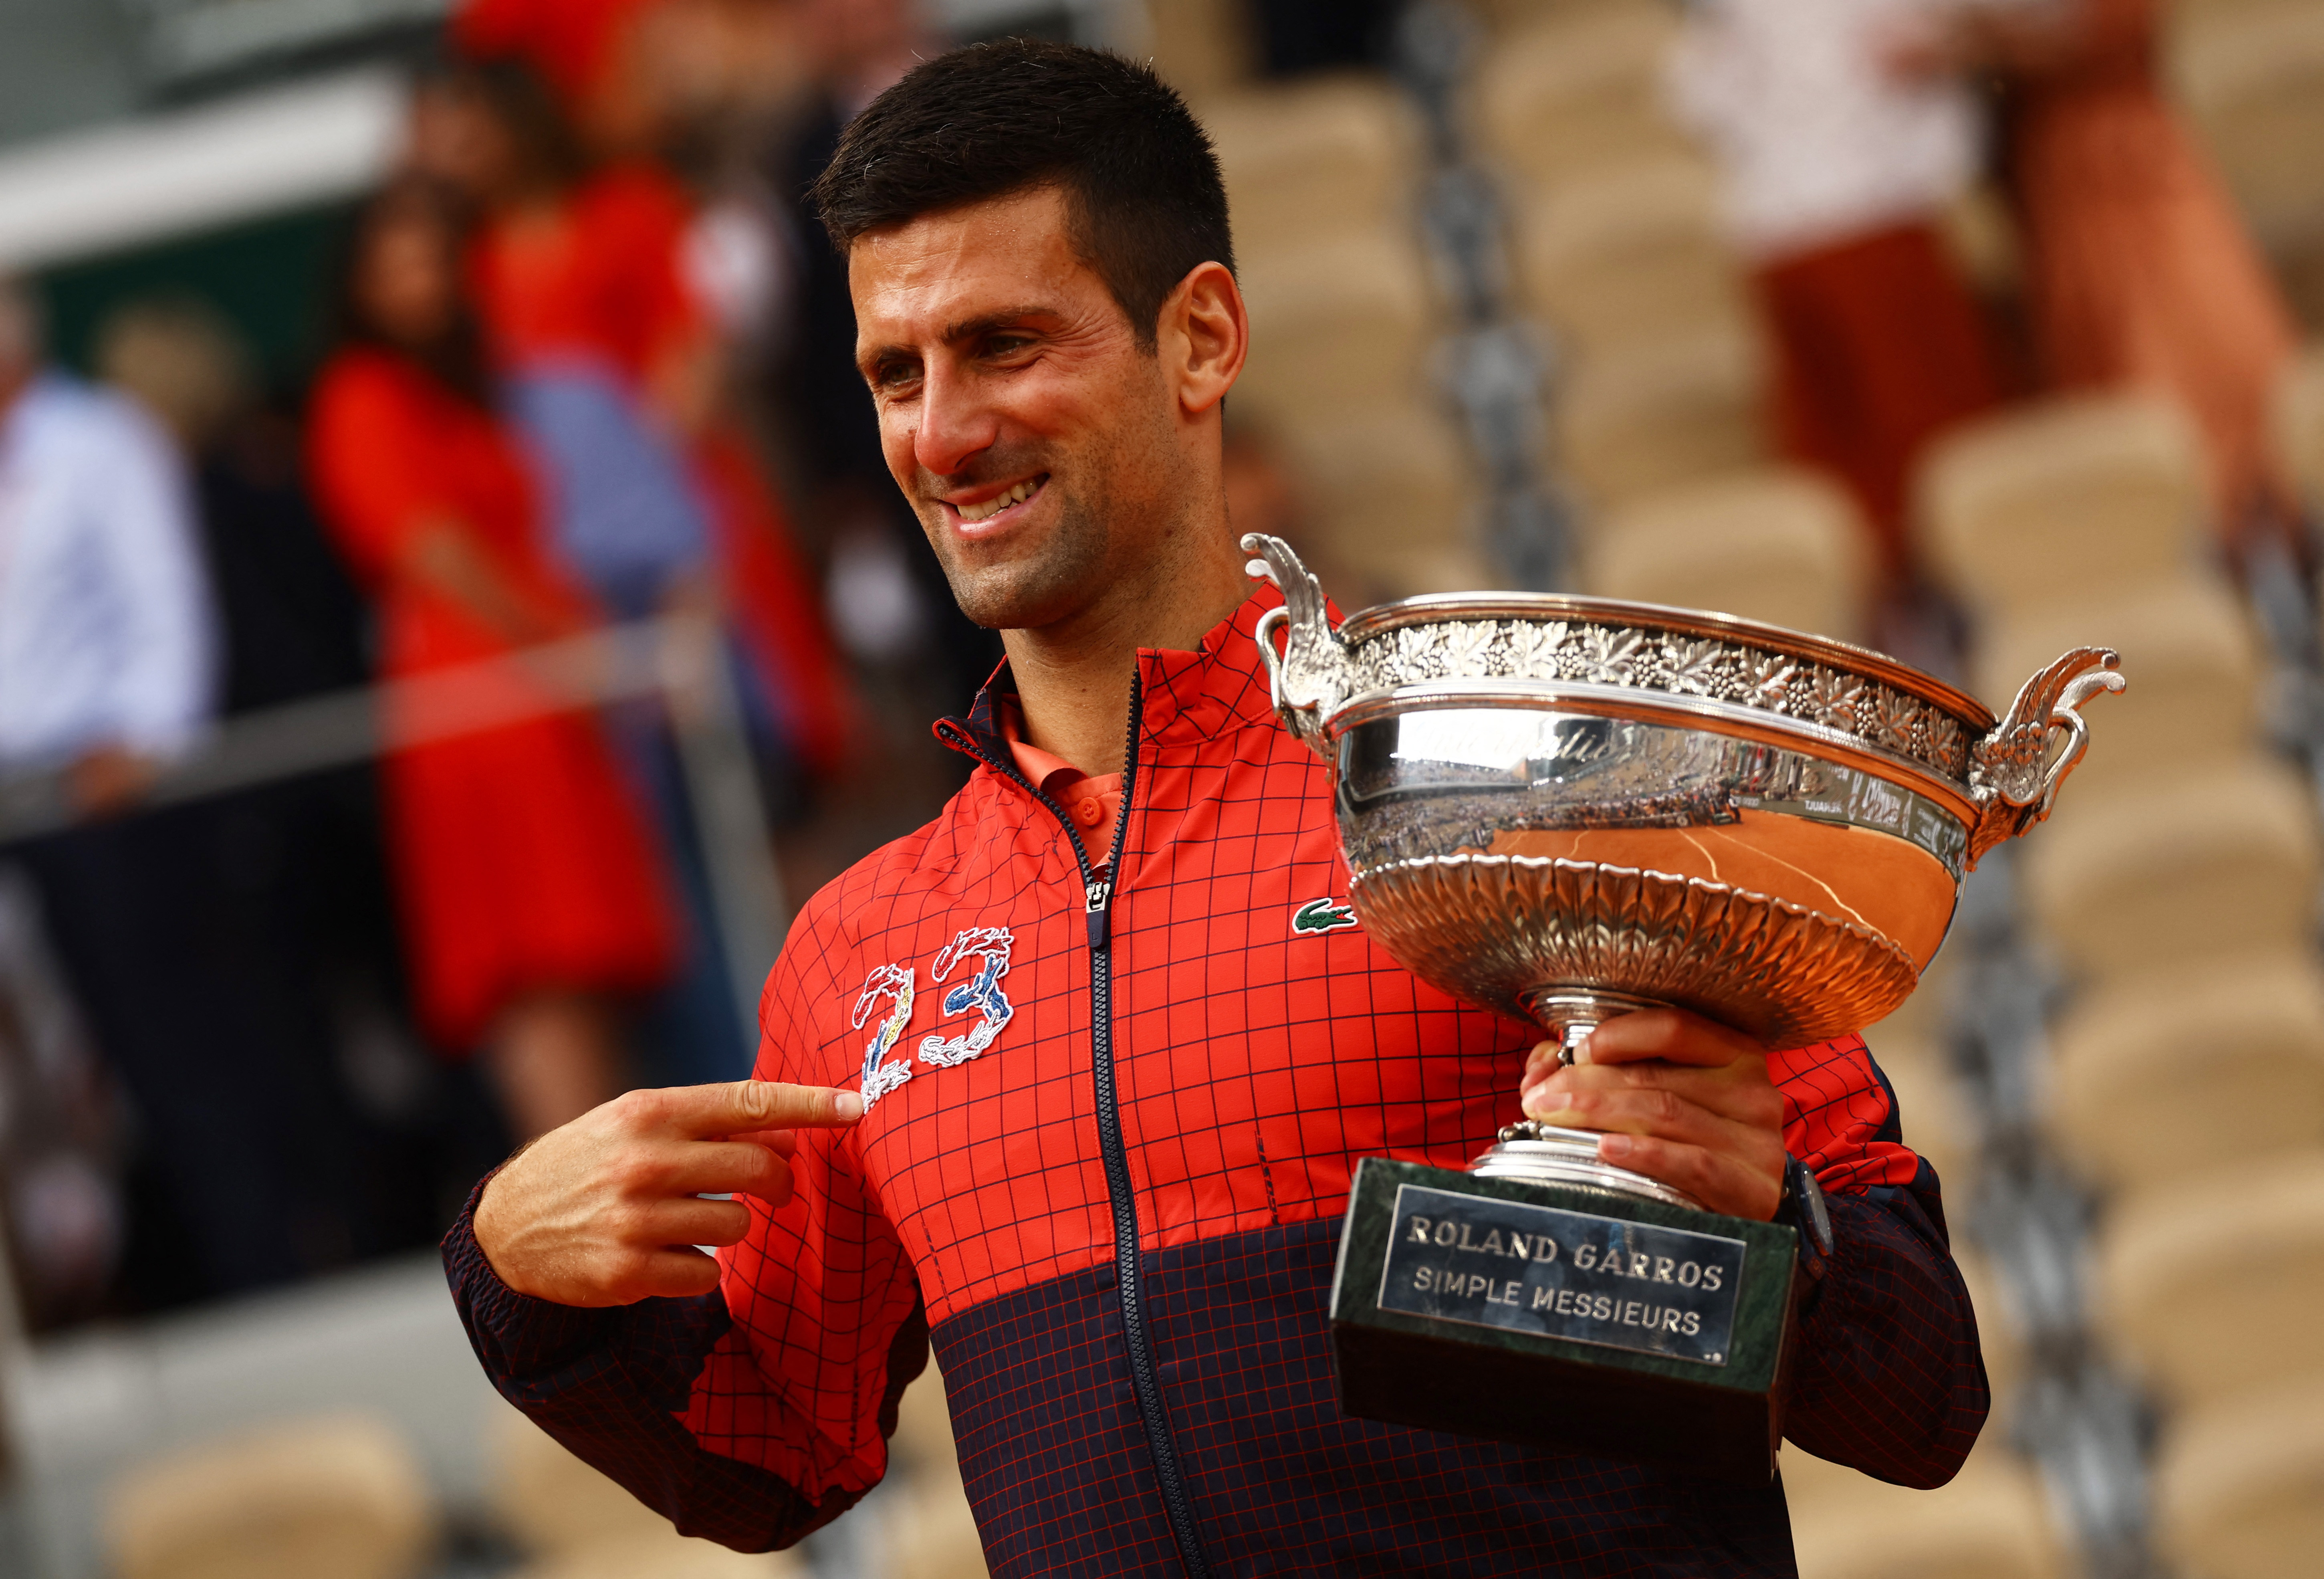 Grand Slam King Djokovic wins 23rd crown by conquering Ruud at French Open